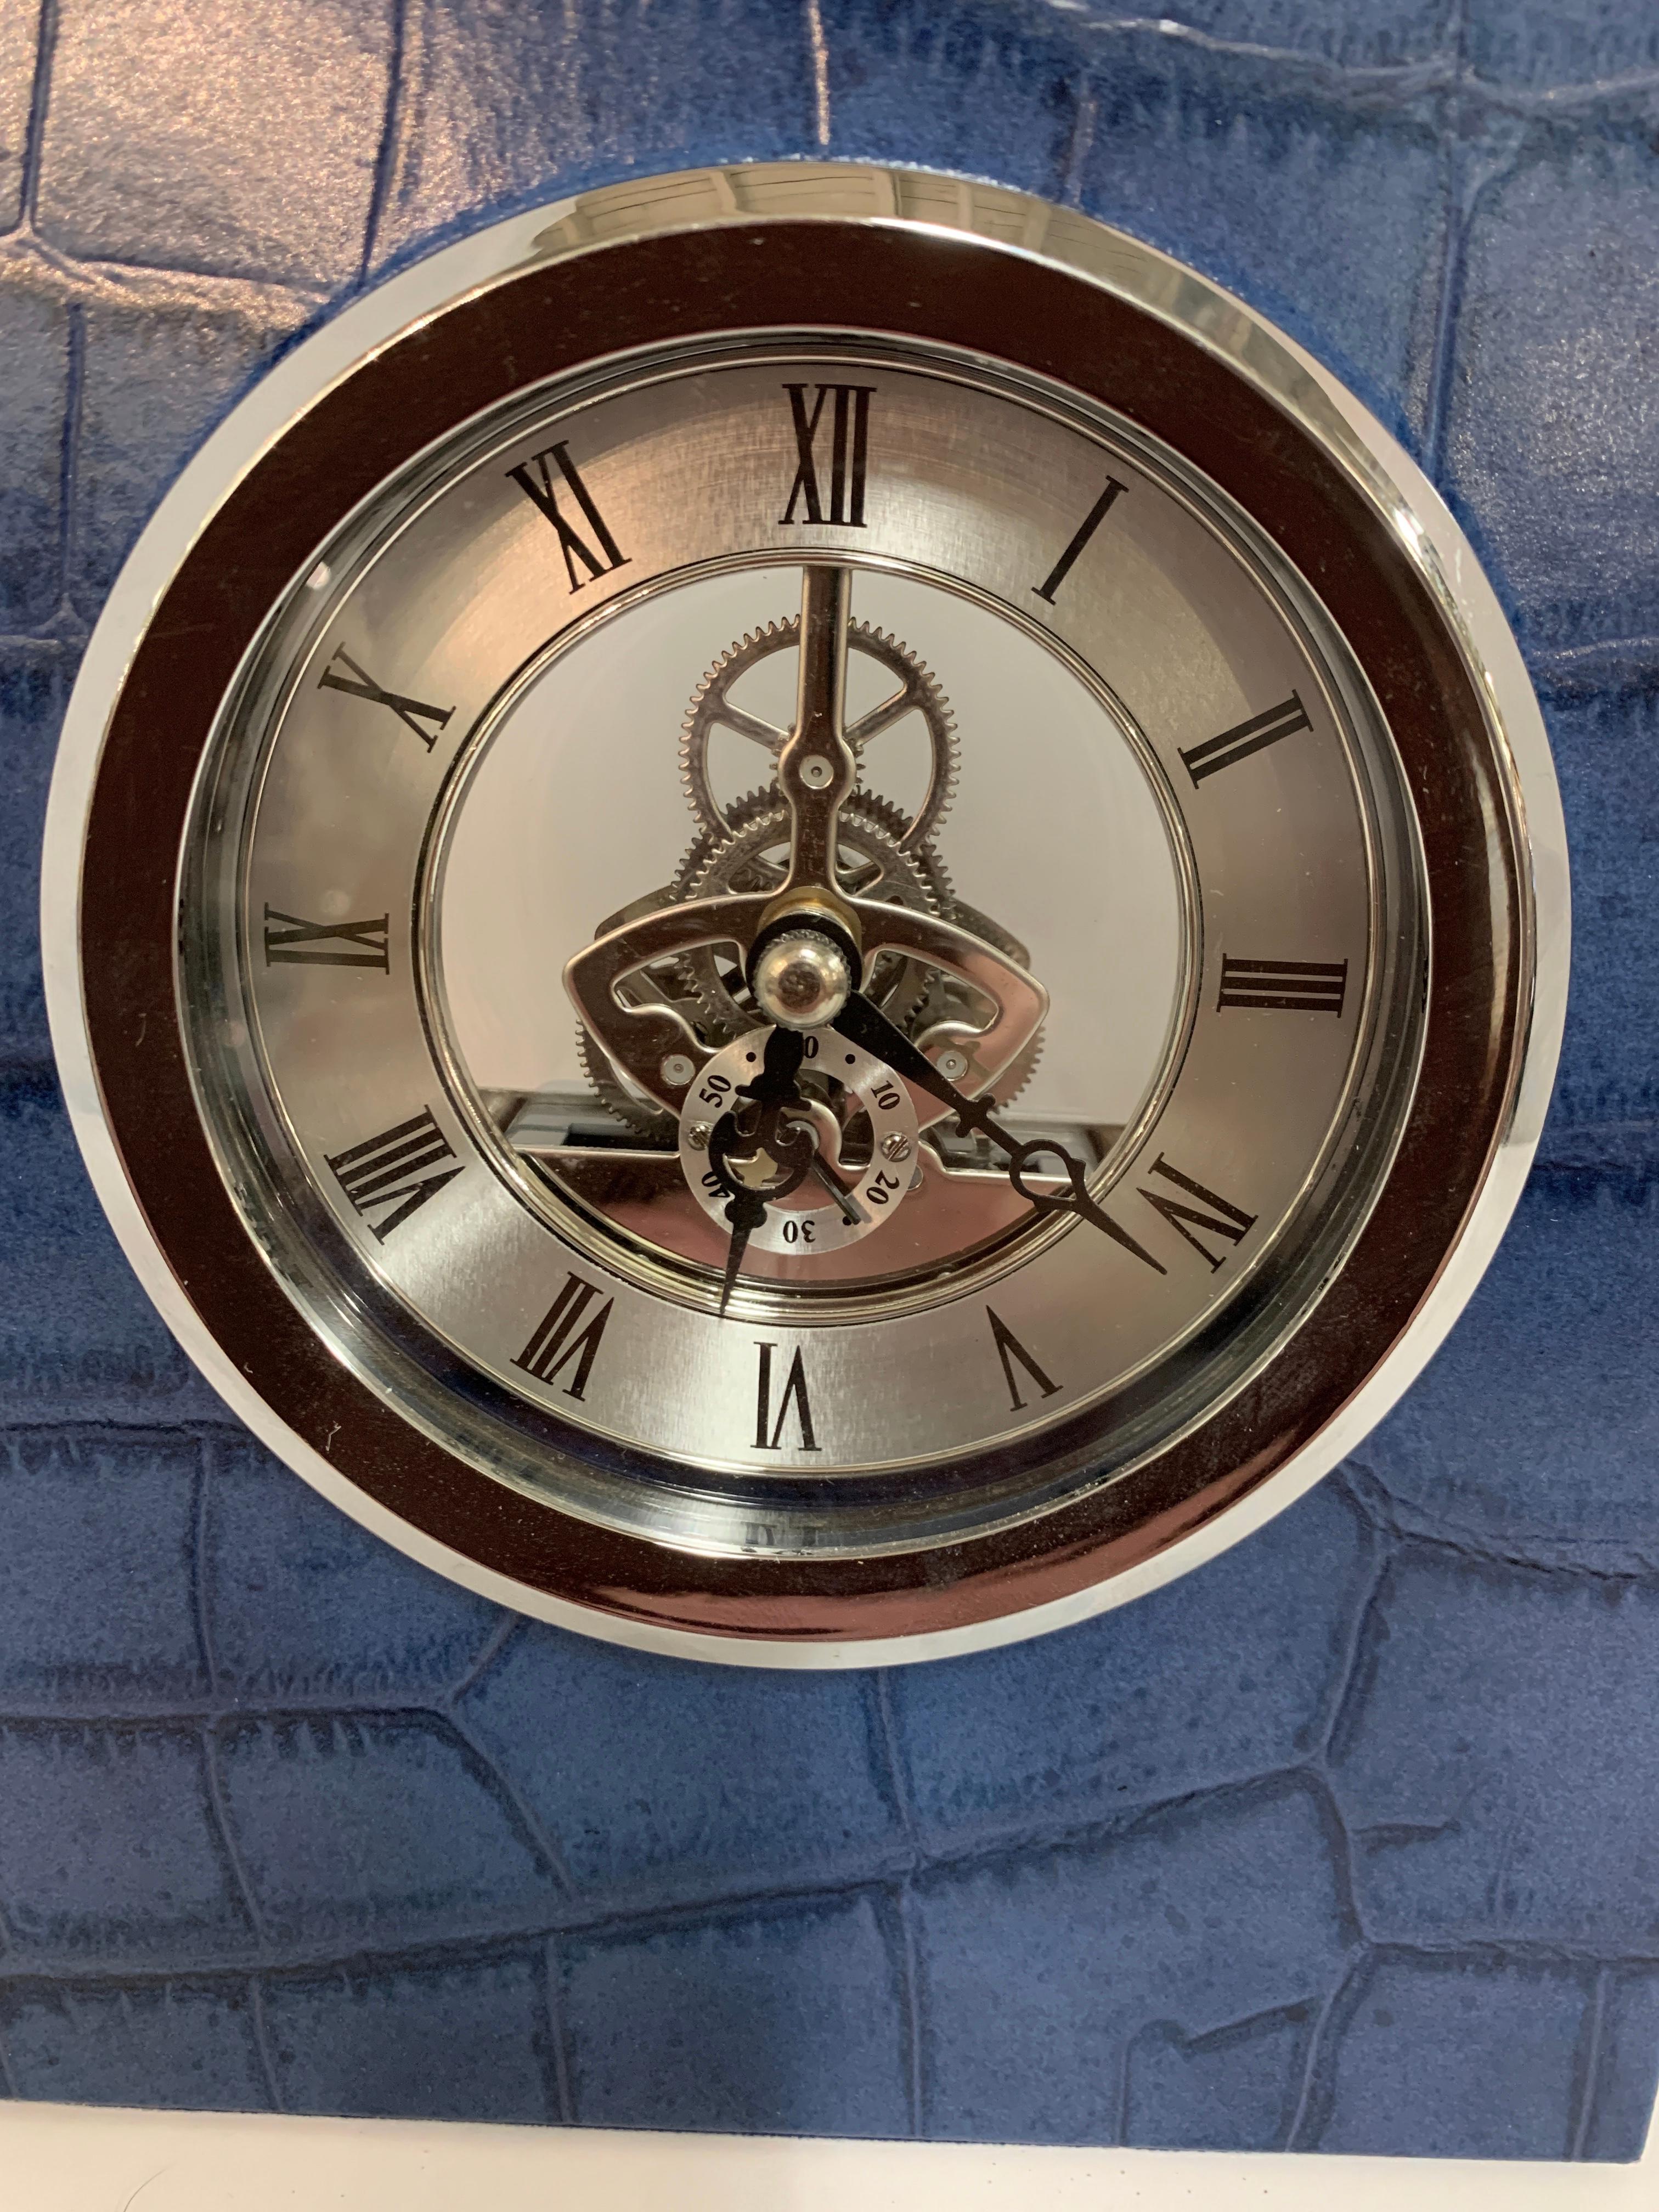 A simply beautiful clock in an alligator or crocodile grained leather by Renzo Romagnoli, the designer and purveyor of luxury games, chess and backgammon sets, jewelry boxes, watch winders and other items. This clock is in running condition with a